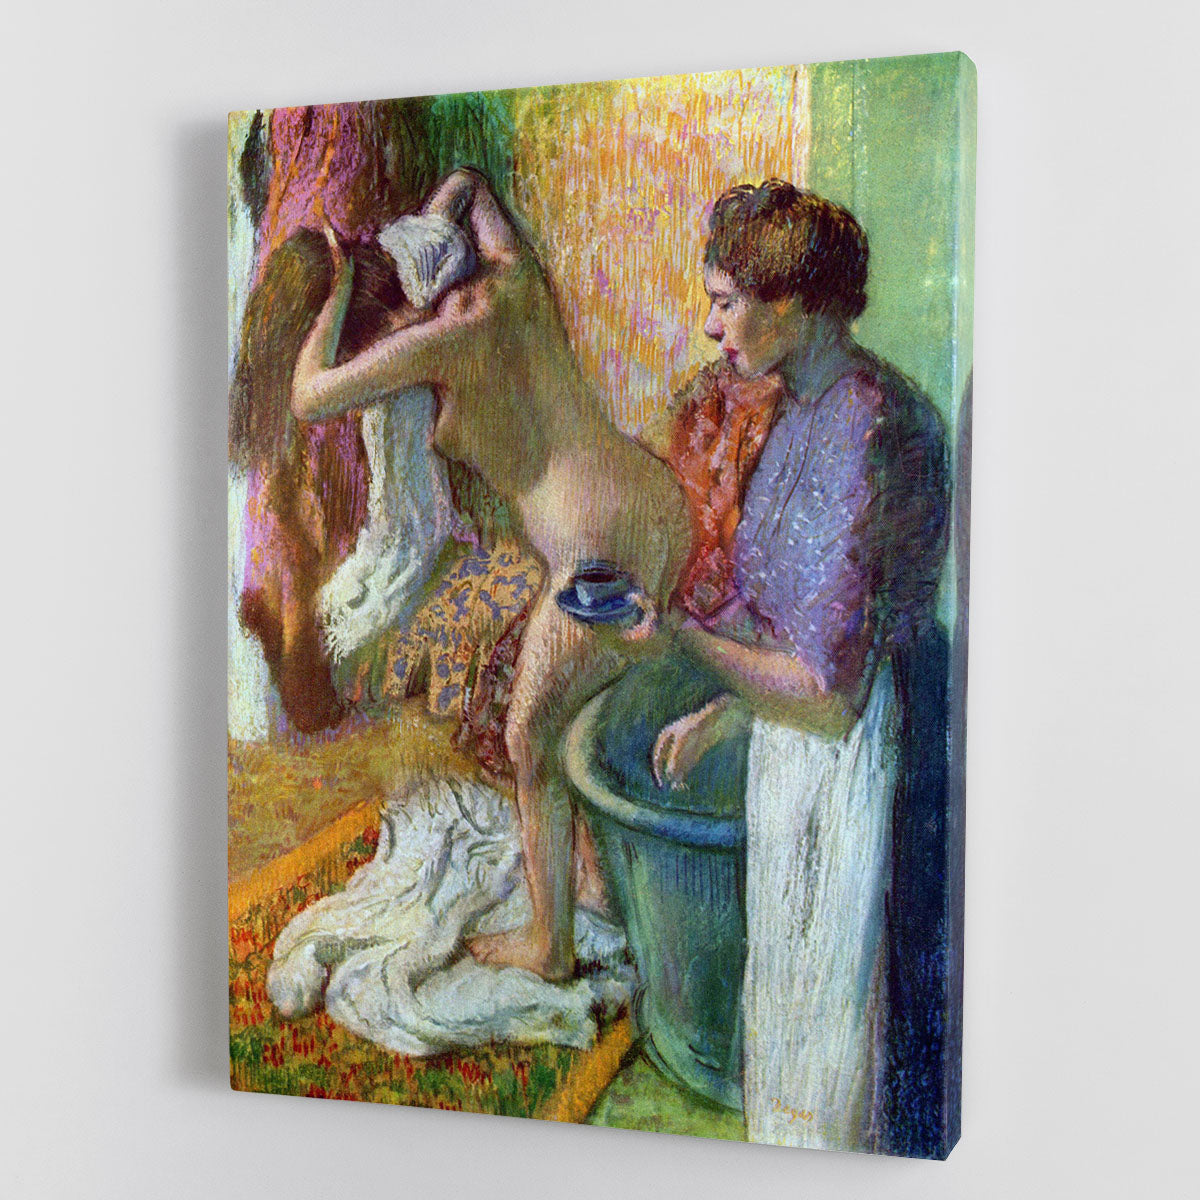 After bathing 1 by Degas Canvas Print or Poster - Canvas Art Rocks - 1